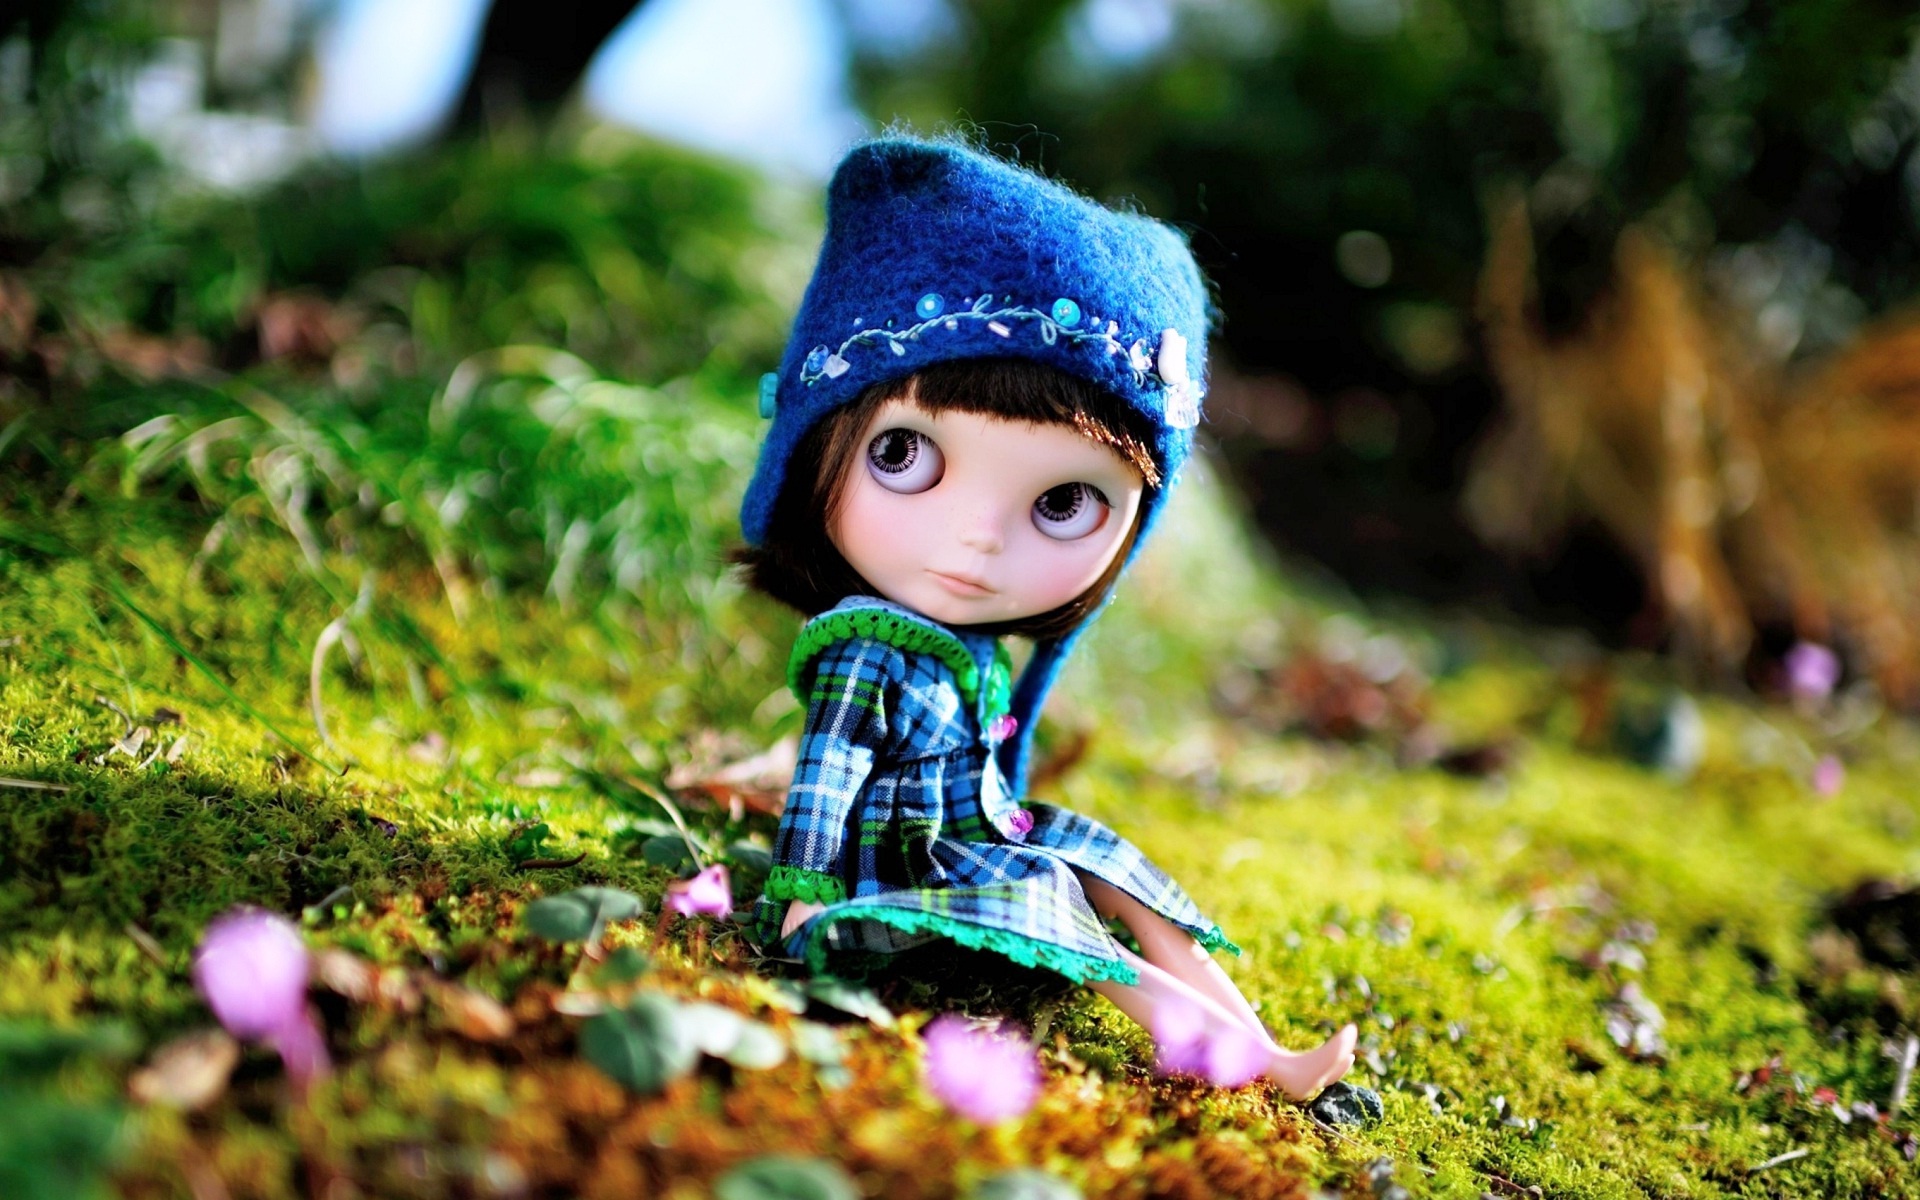 nice and cute wallpaper,people in nature,doll,toy,leaf,grass